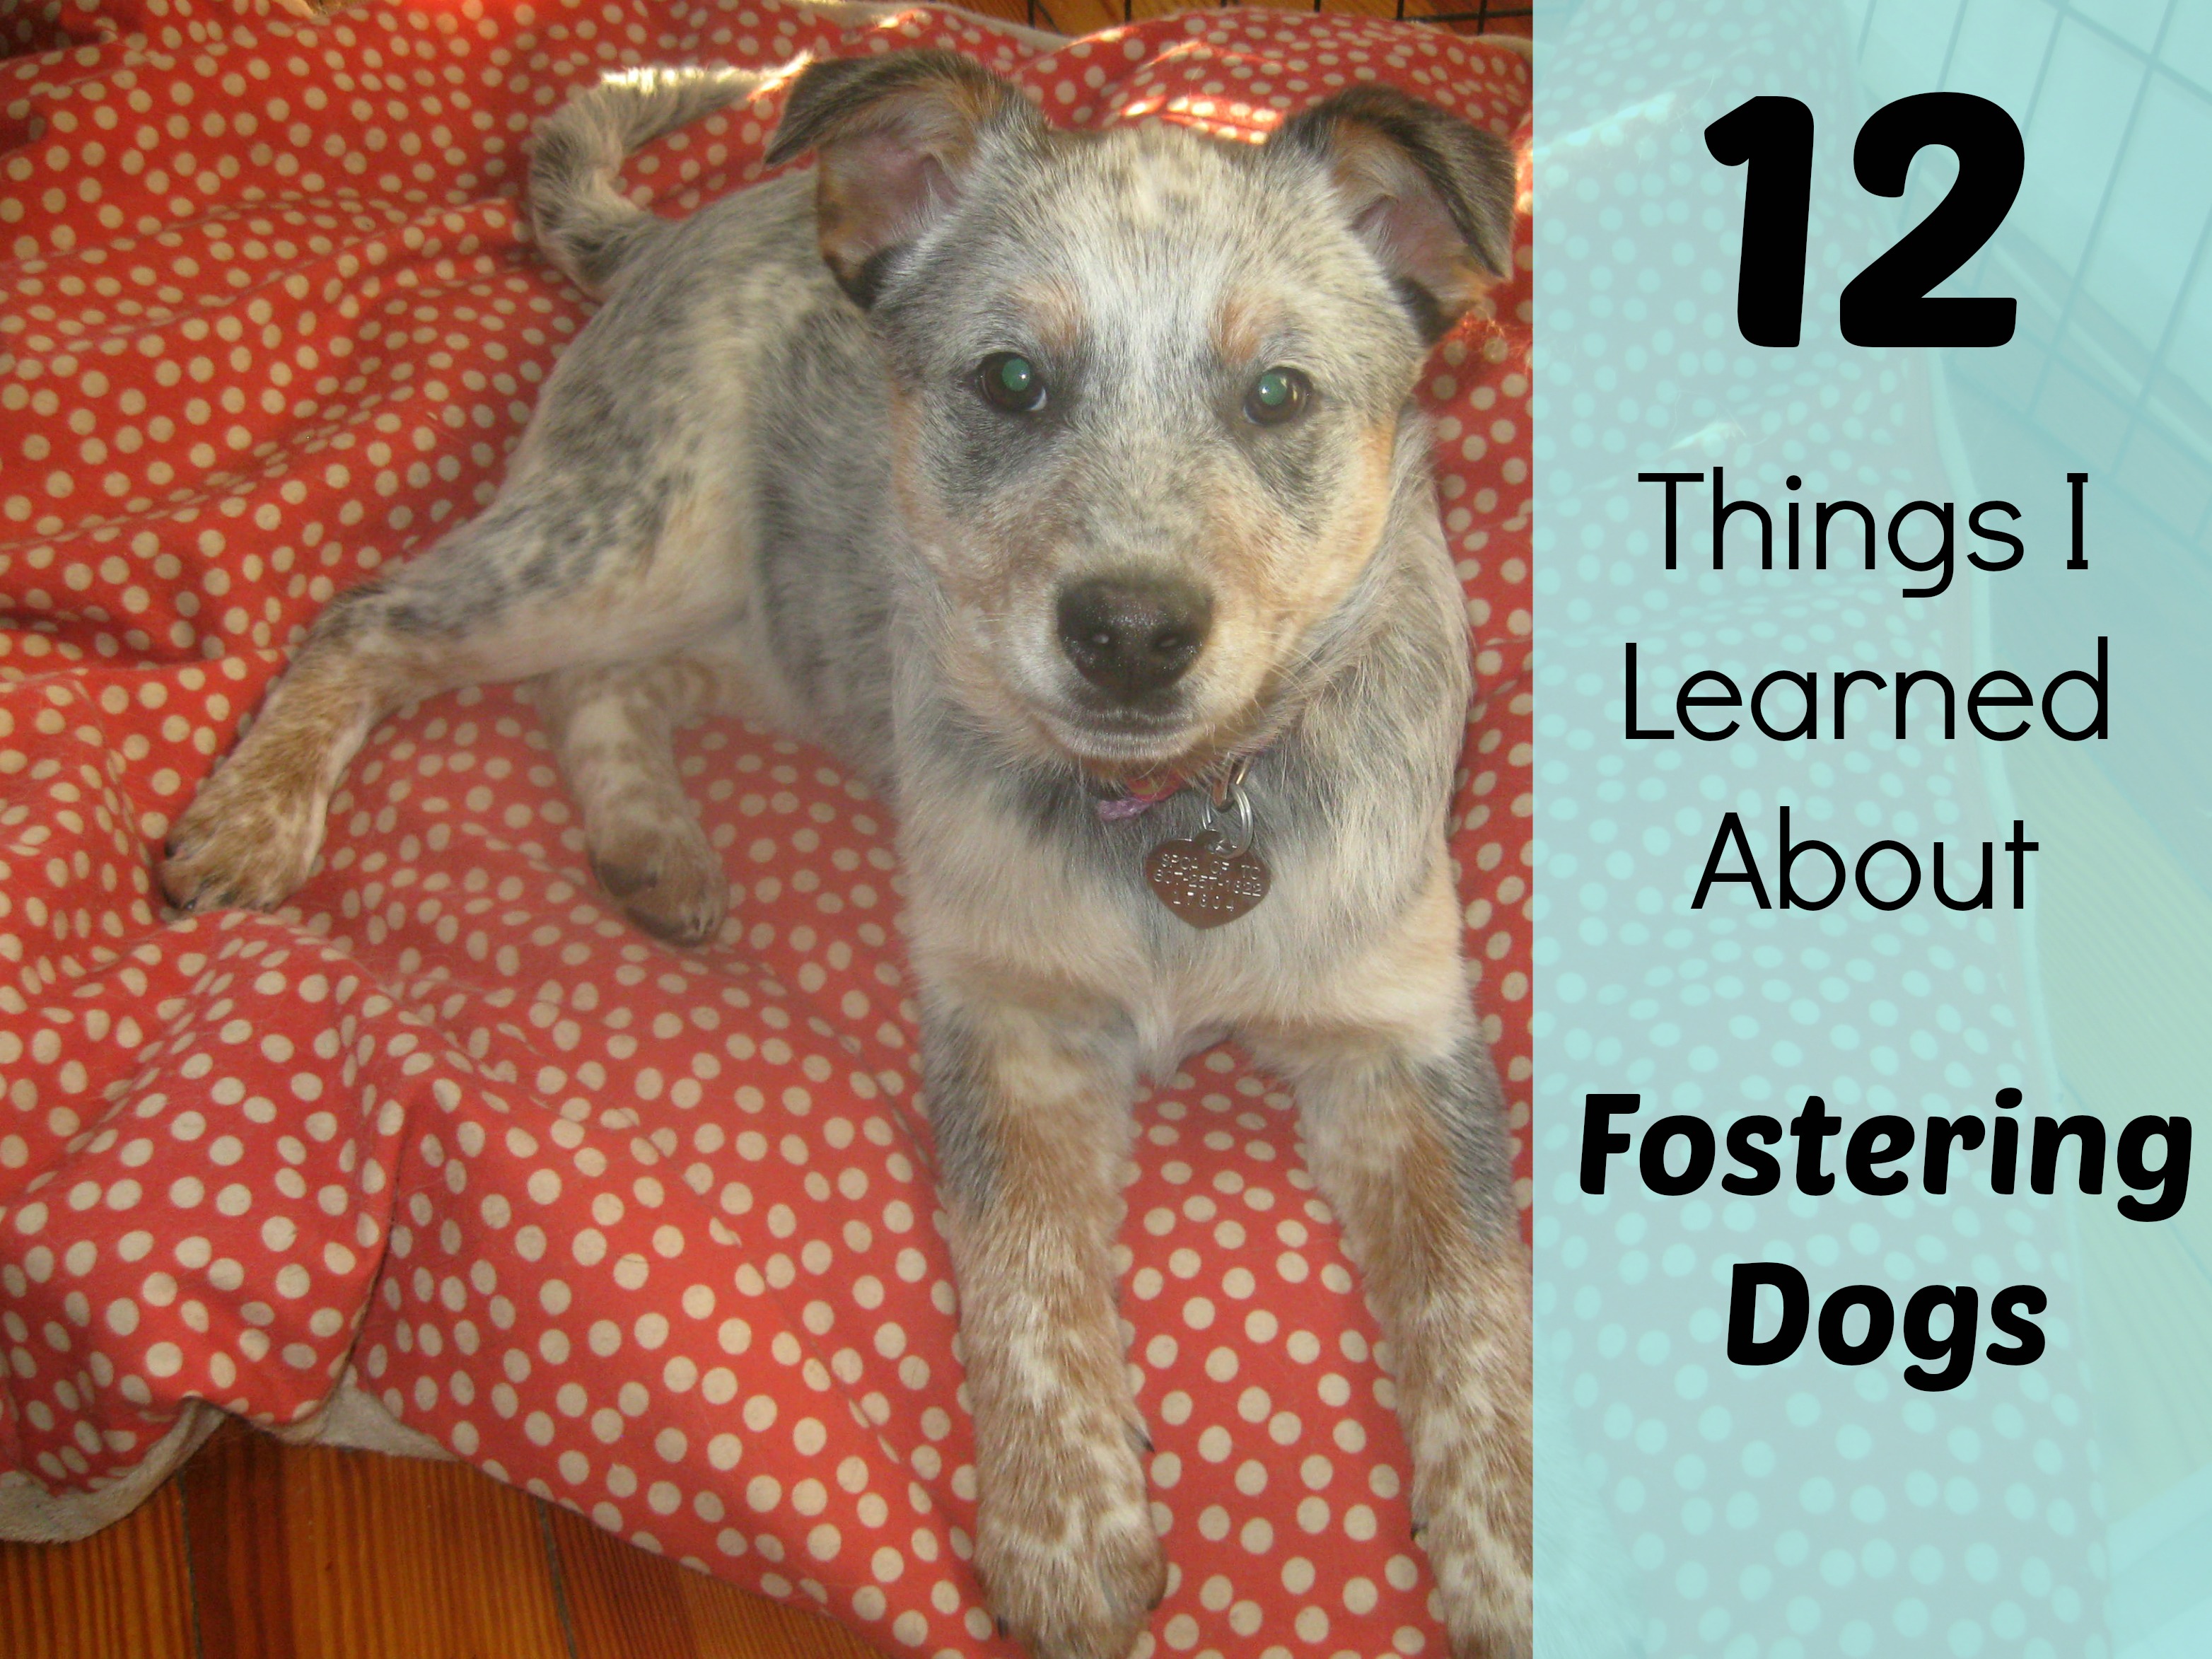 12 Things I learned from fostering dogs.